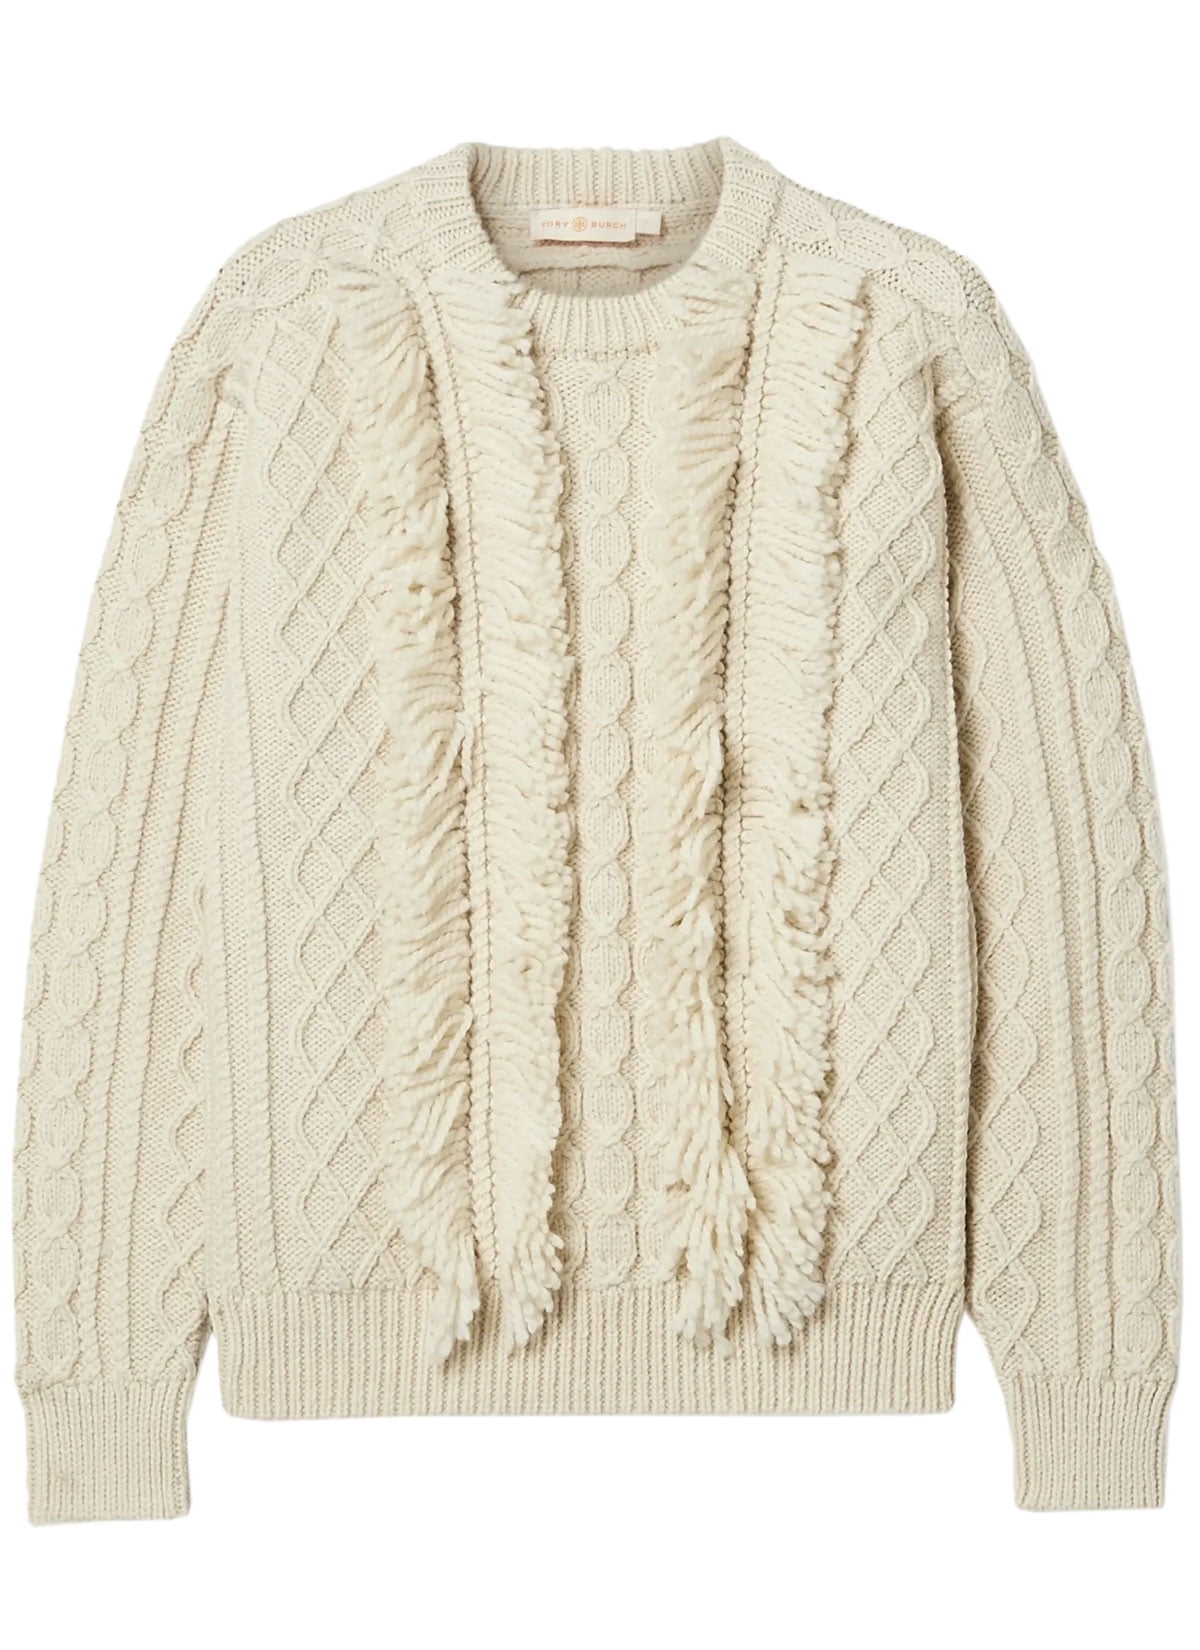 Tory Burch Womens Kendra Fringe Cable Knit Sweater X-Small New Ivory - NWT  $498 